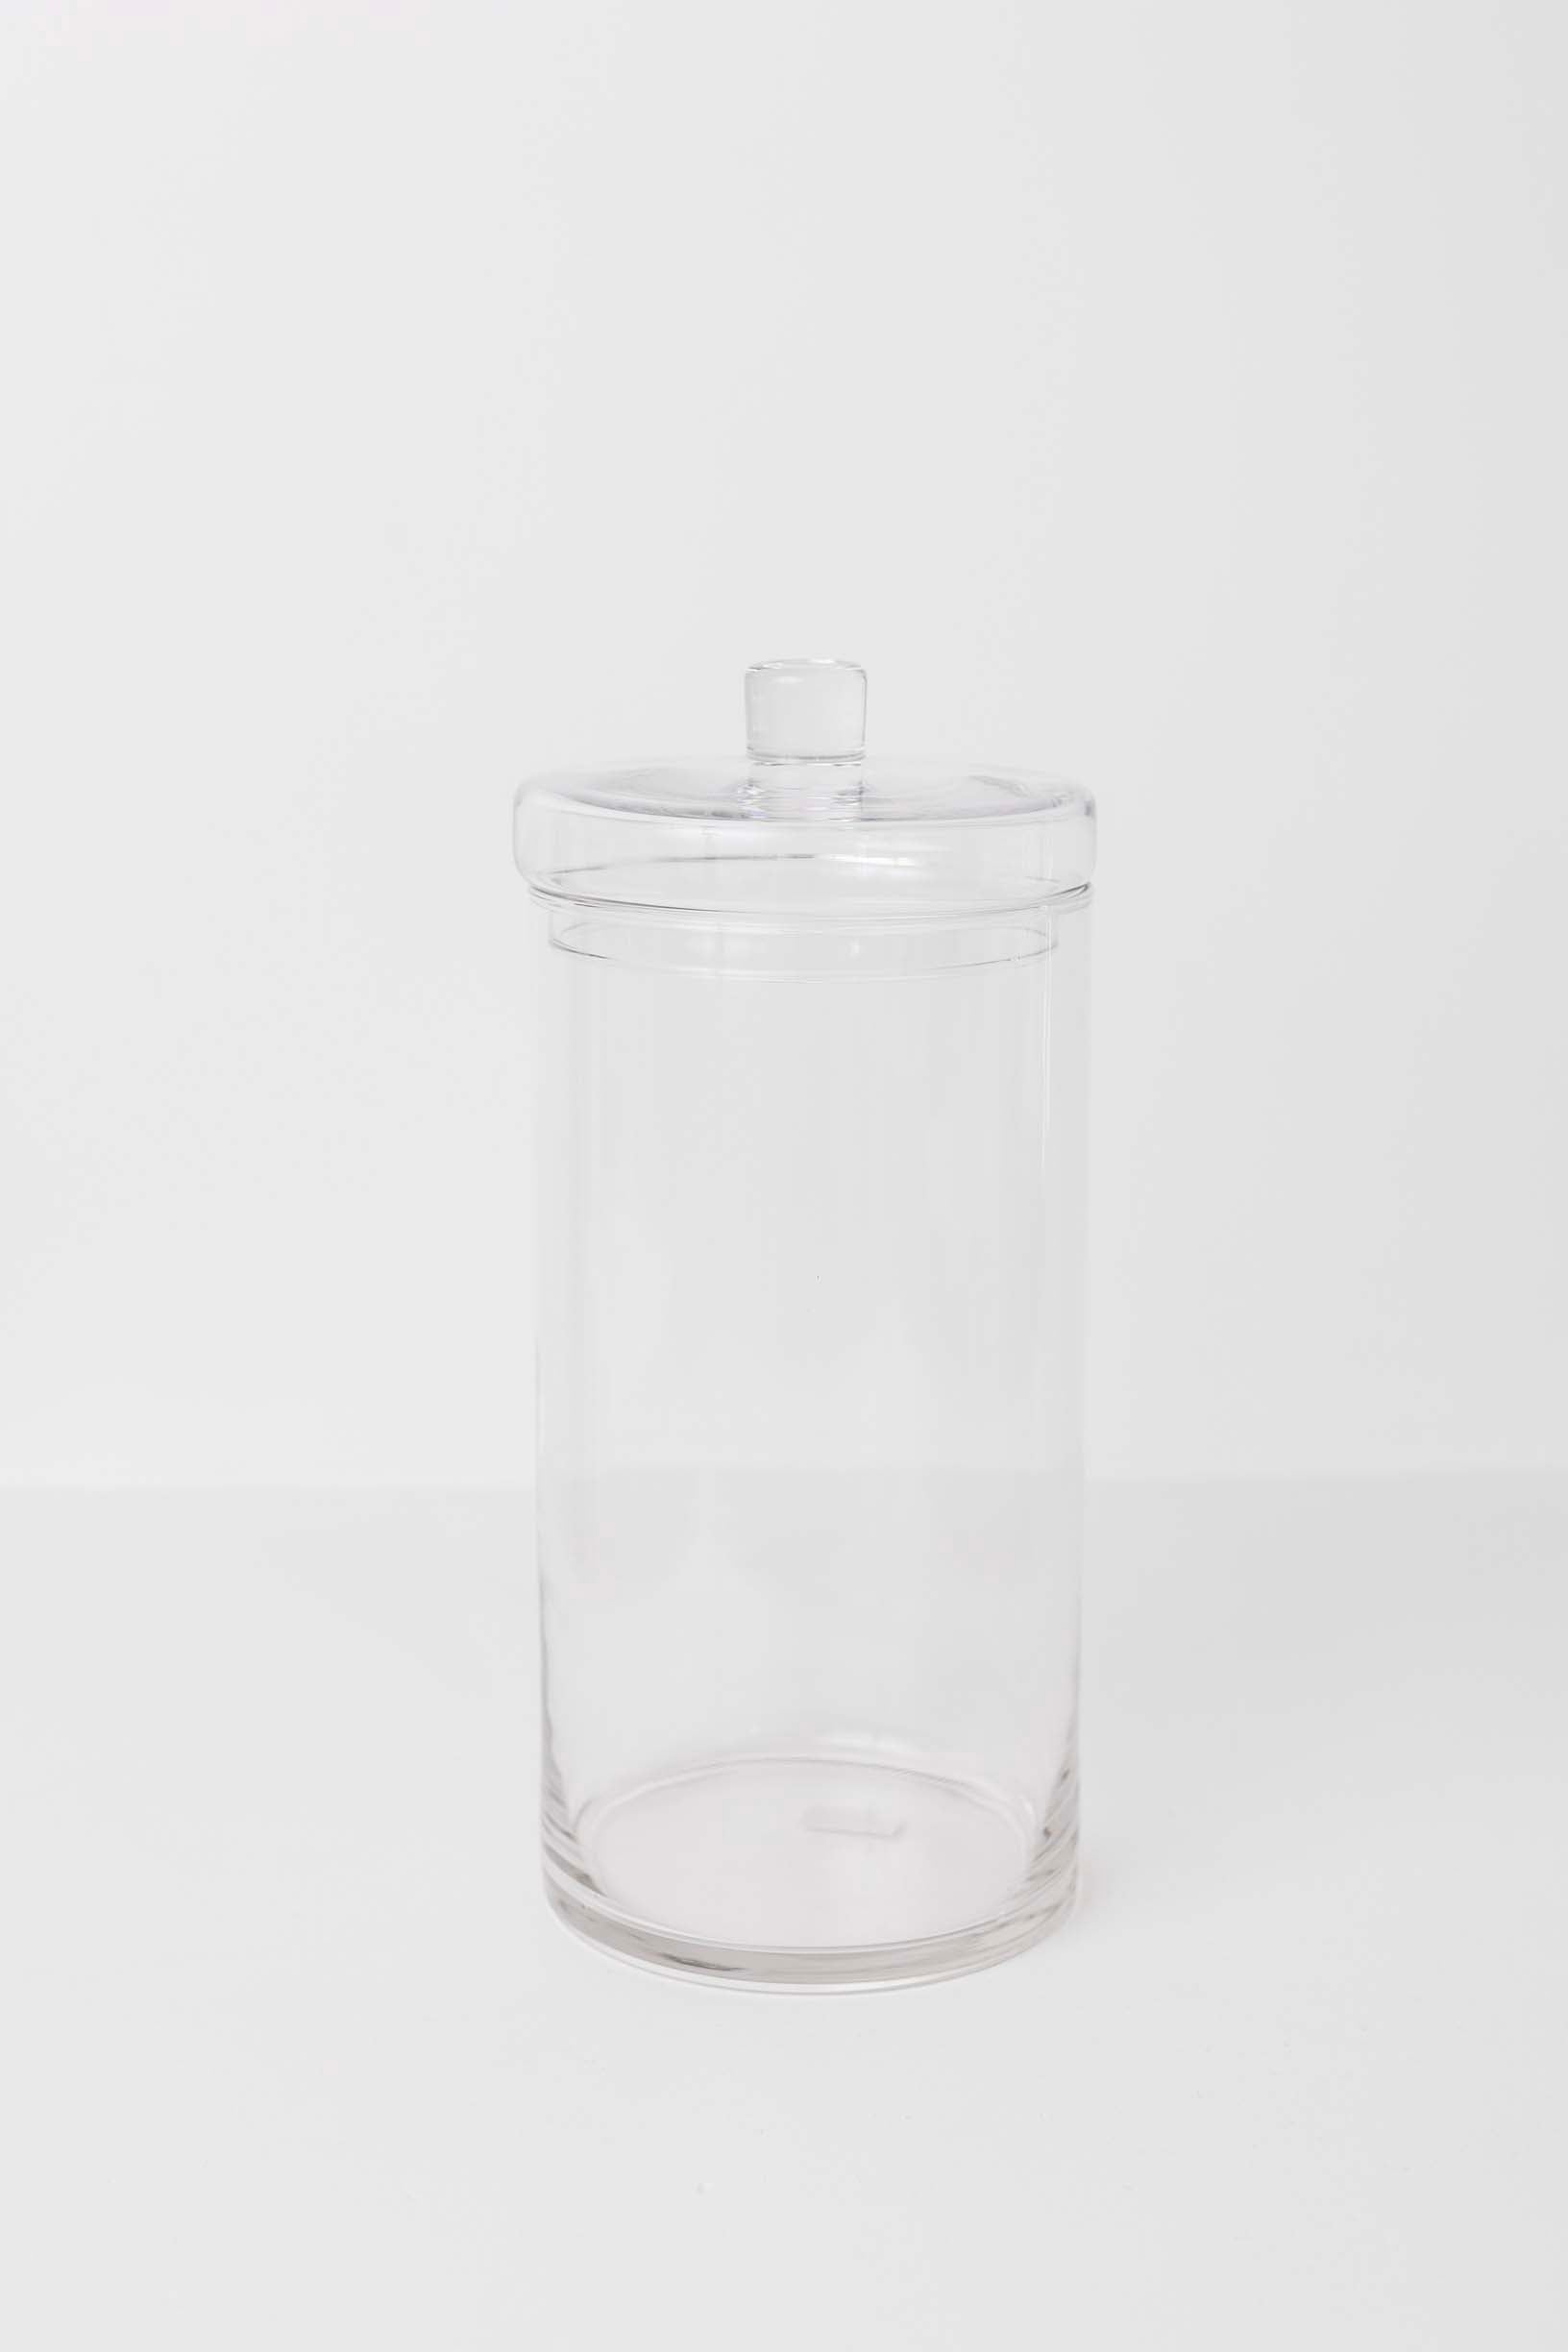 Massey Glass Canister - 3 Sizes